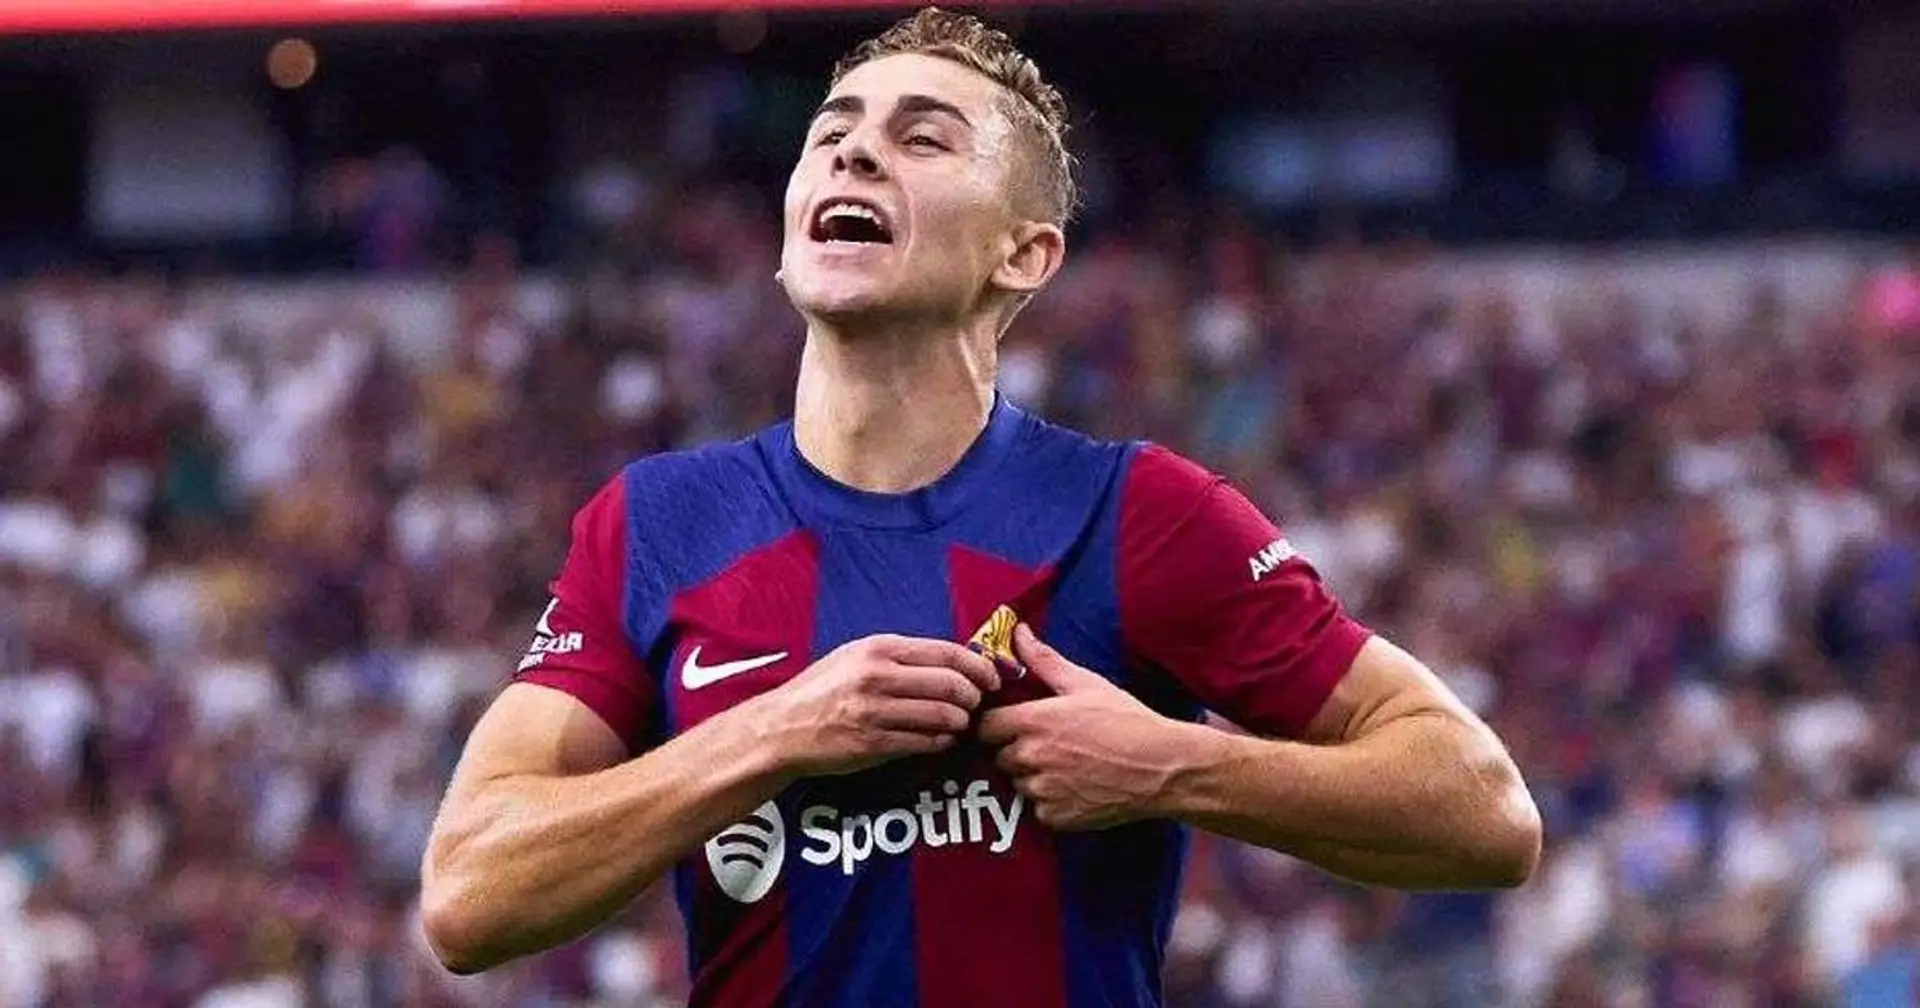 Revealed: why Fermin Lopez replaces Andreas Christensen in Barca XI vs Atletico